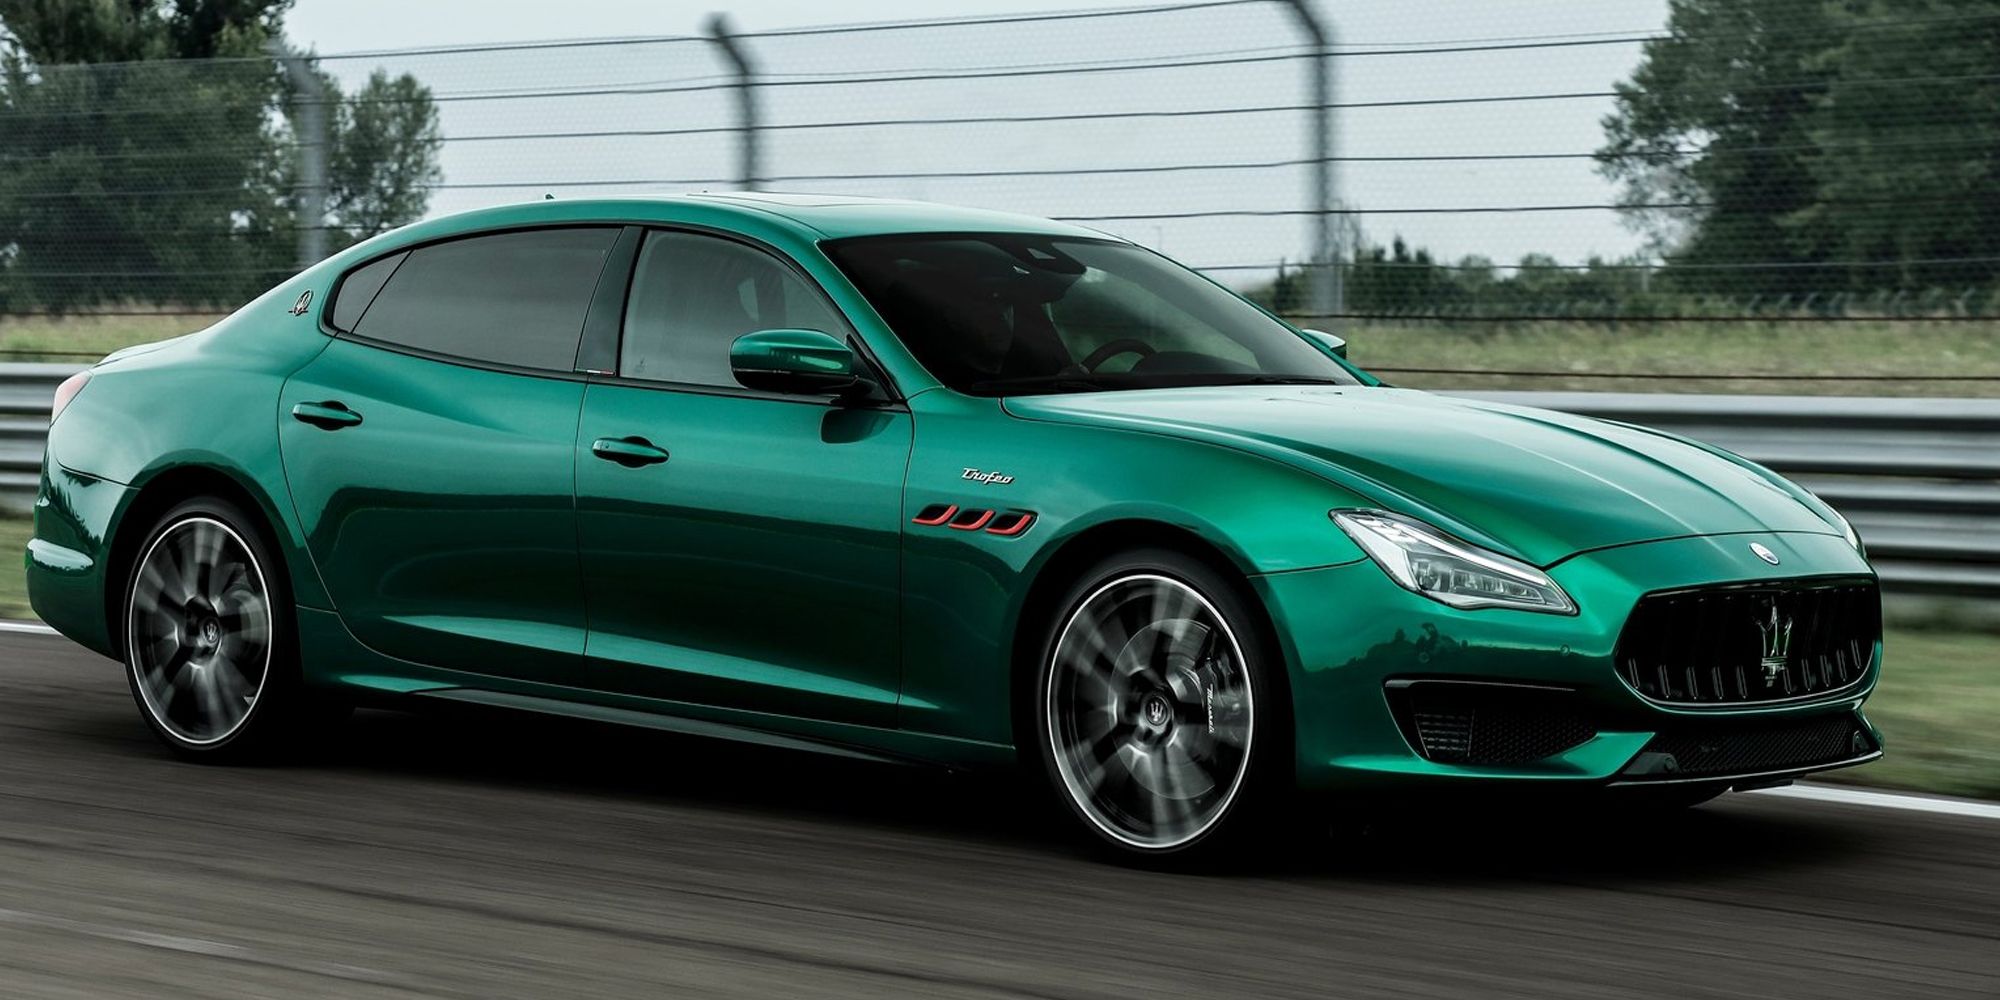 Front 3/4 view of a green Quattroporte on track